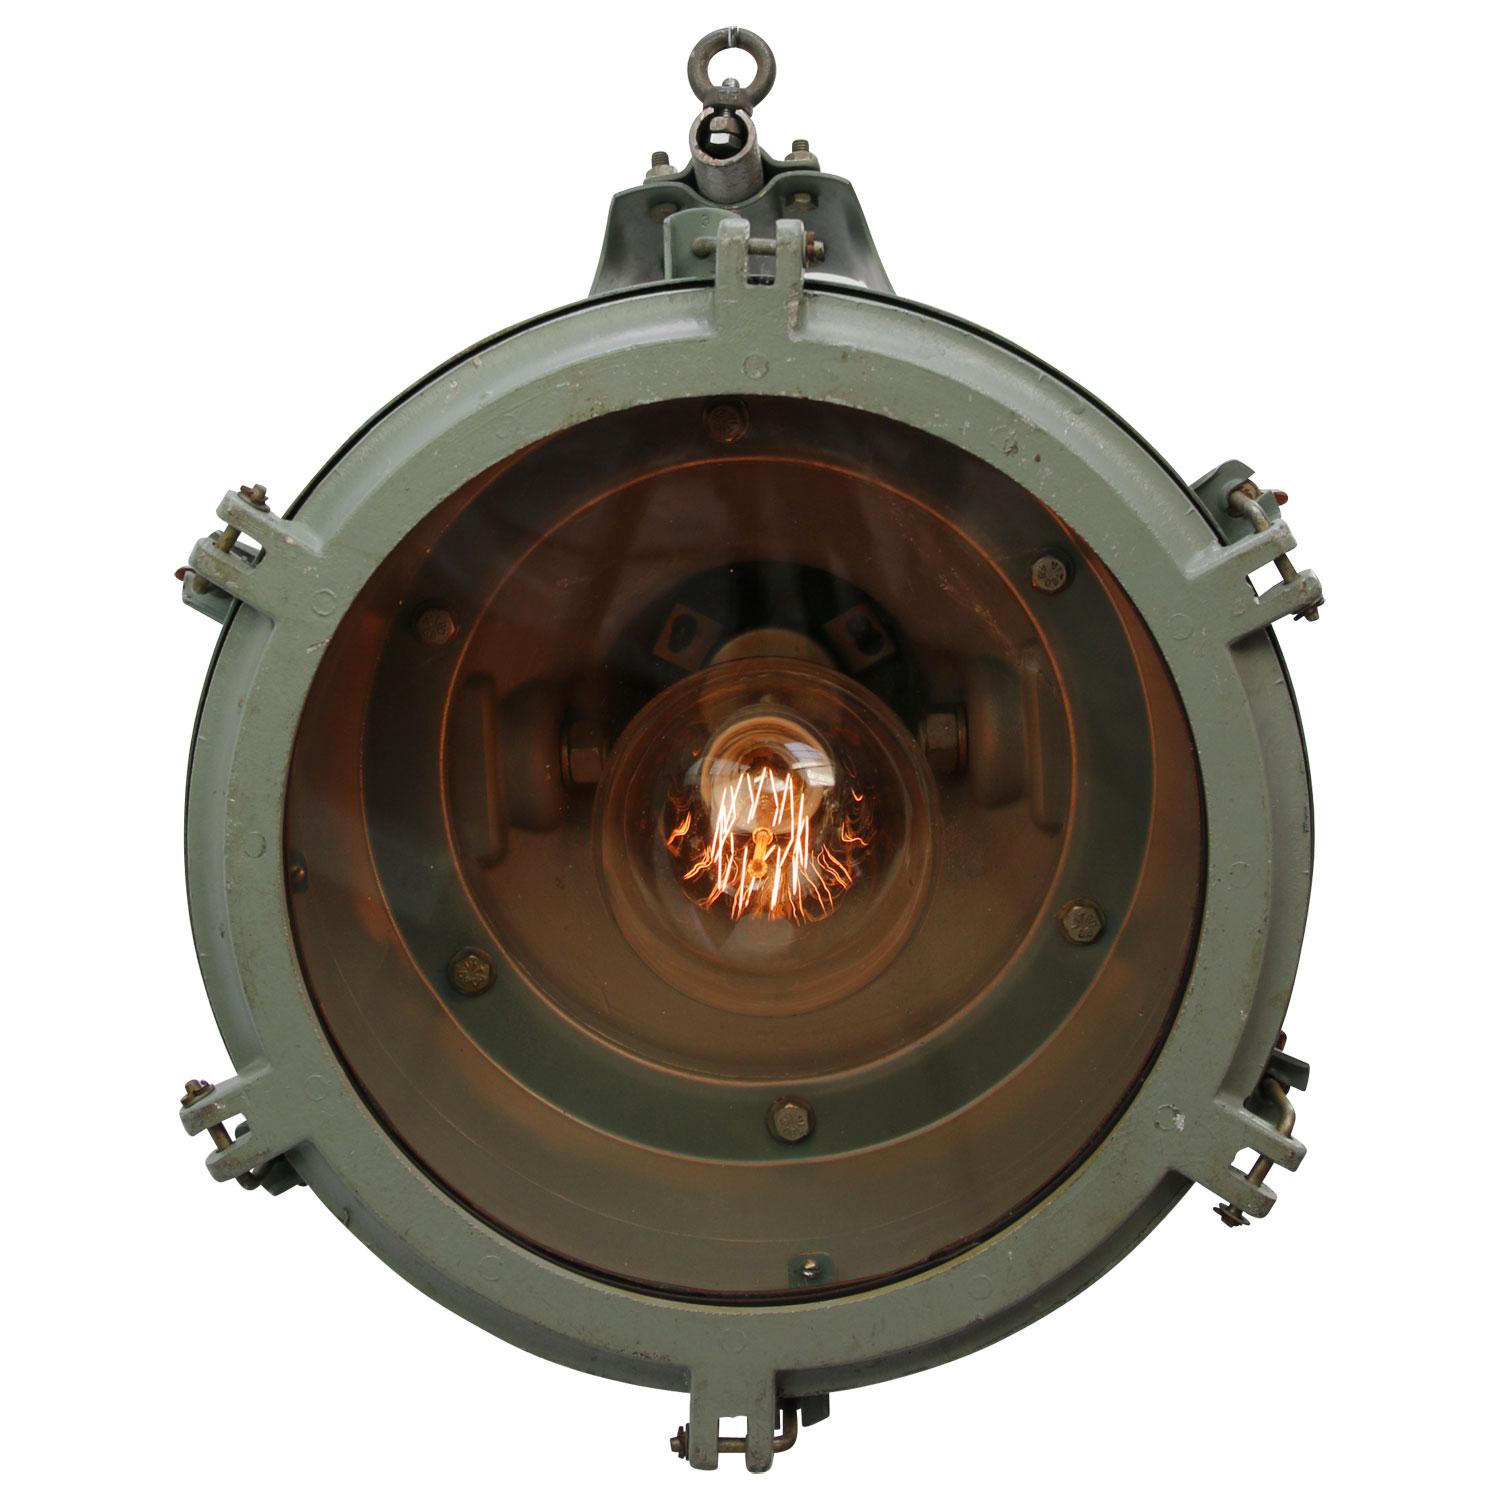 Industrial hanging light spot.
Cast aluminium with clear glass.

Weight: 10.00 kg / 22 lb

Priced per individual item. All lamps have been made suitable by international standards for incandescent light bulbs, energy-efficient and LED bulbs.